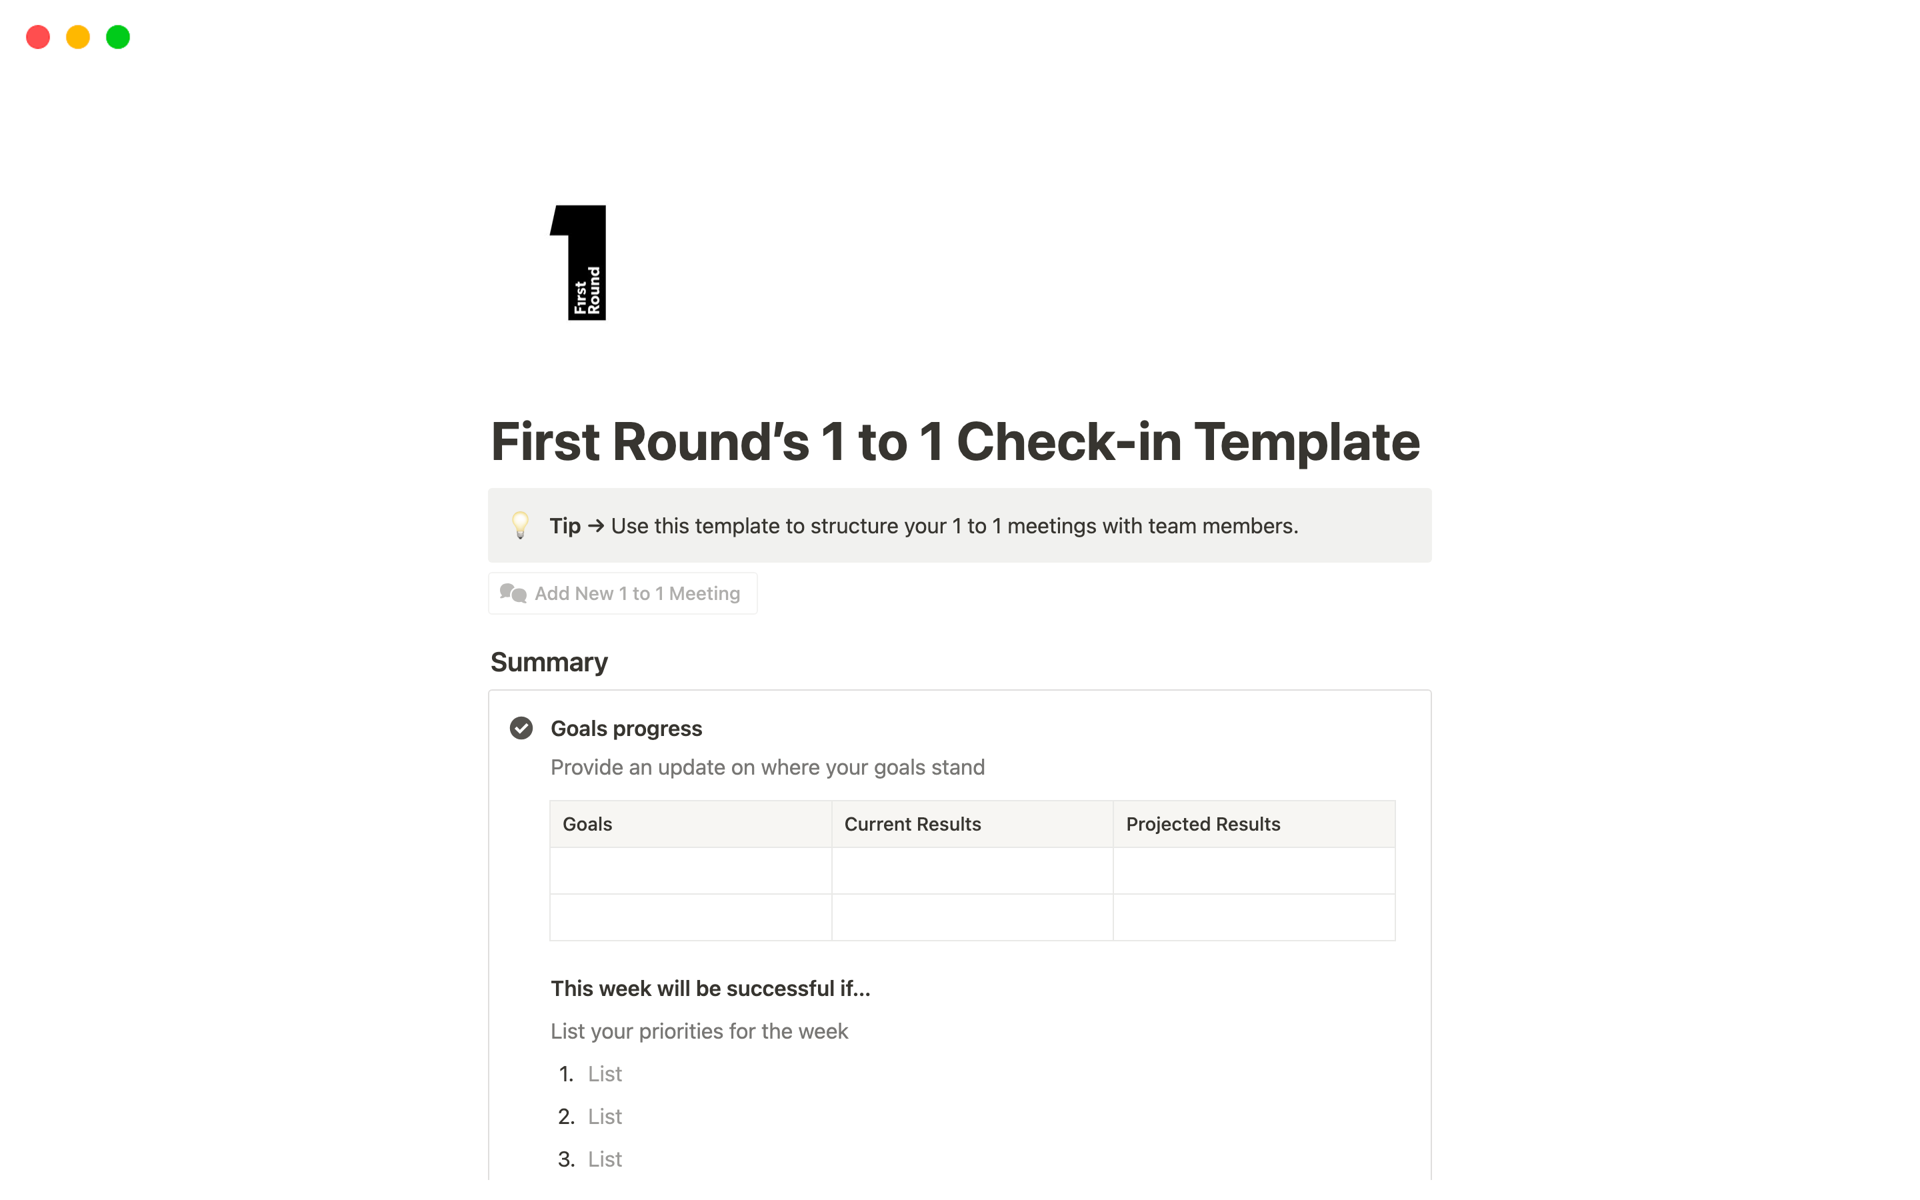 A template preview for 1 to 1 Check-in